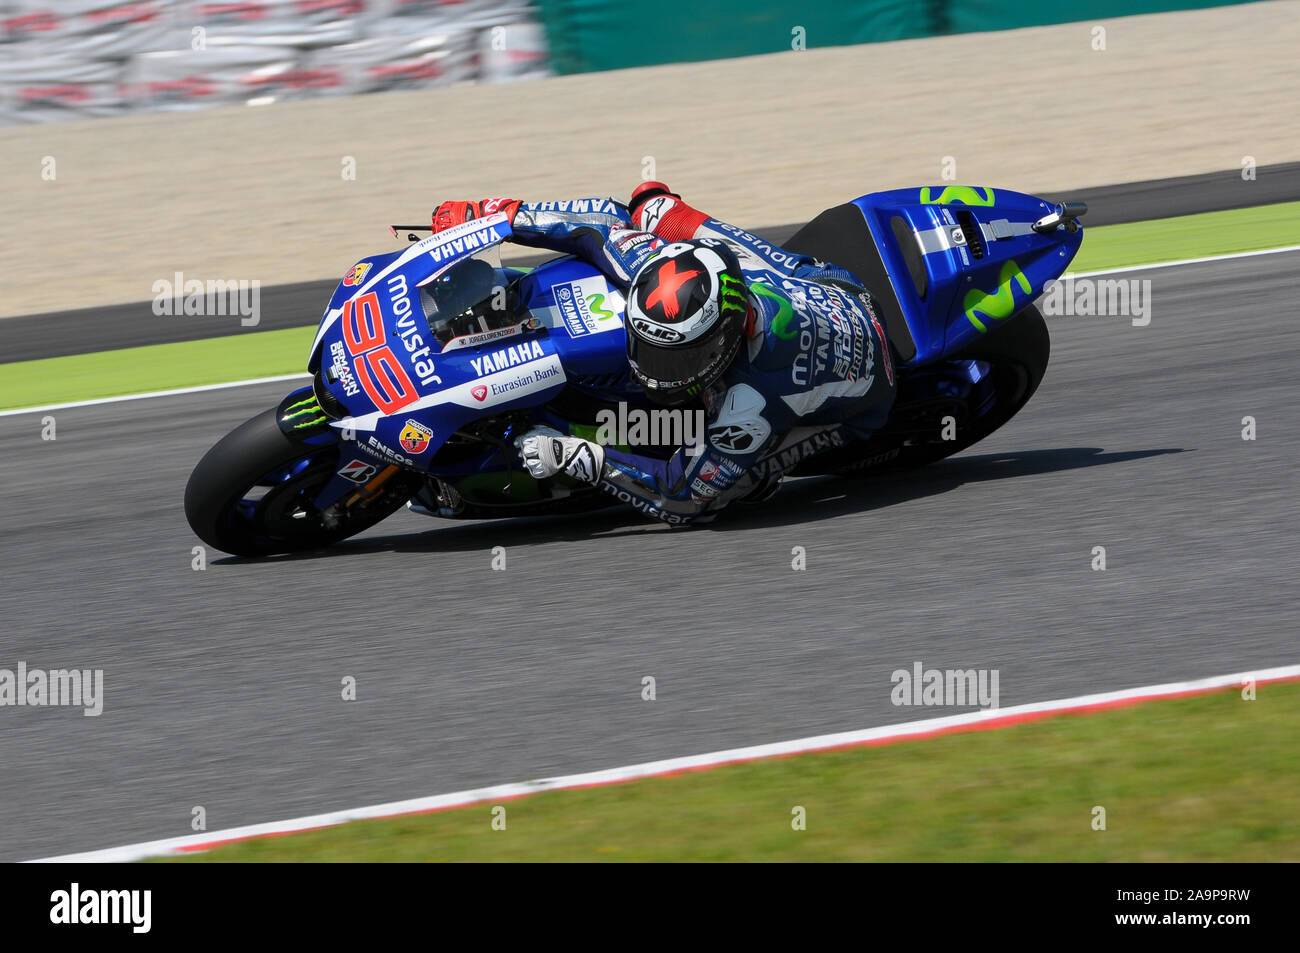 Jorge Lorenzo 15 High Resolution Stock Photography And Images Alamy